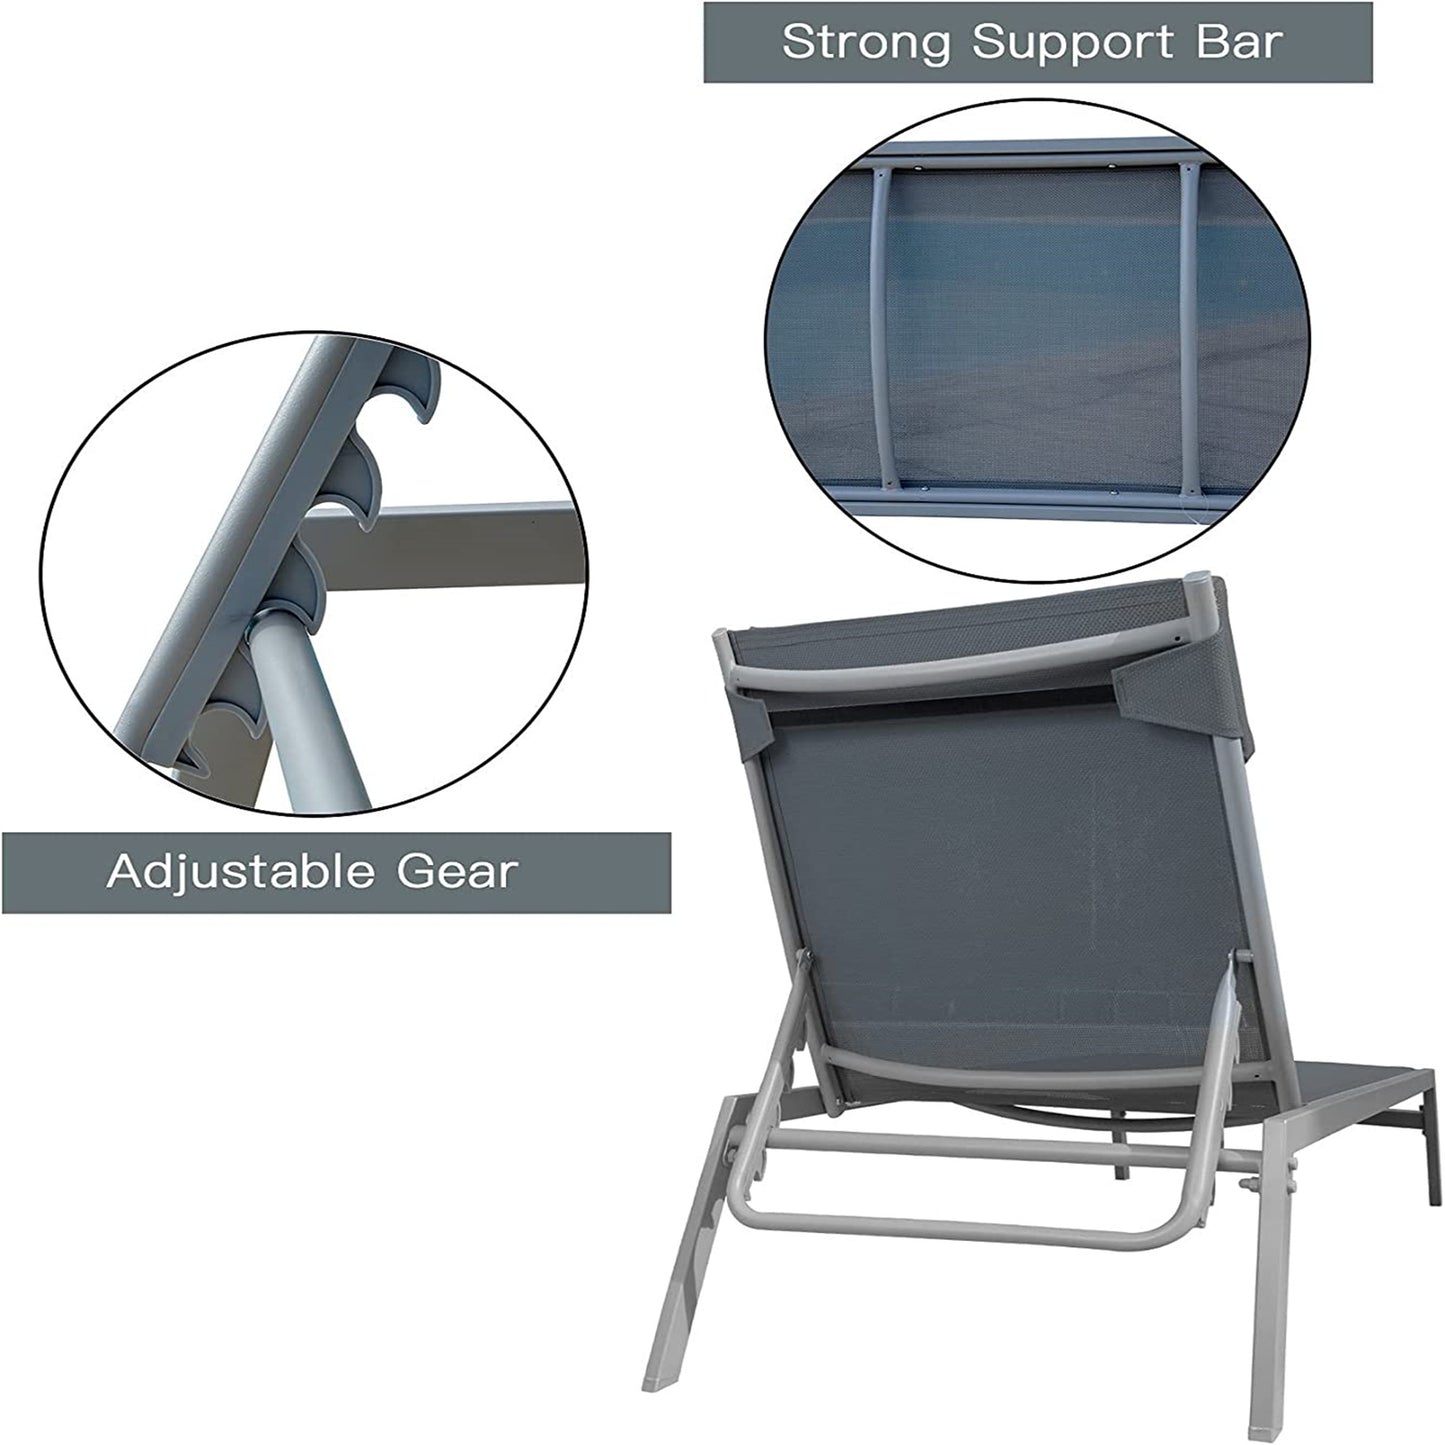 Patio Chaise Lounge Set, 3 Pieces Adjustable Backrest Pool Lounge Chairs Steel Textilene Sunbathing Recliner with Headrest (Grey,2 Lounge Chair+1 Table)